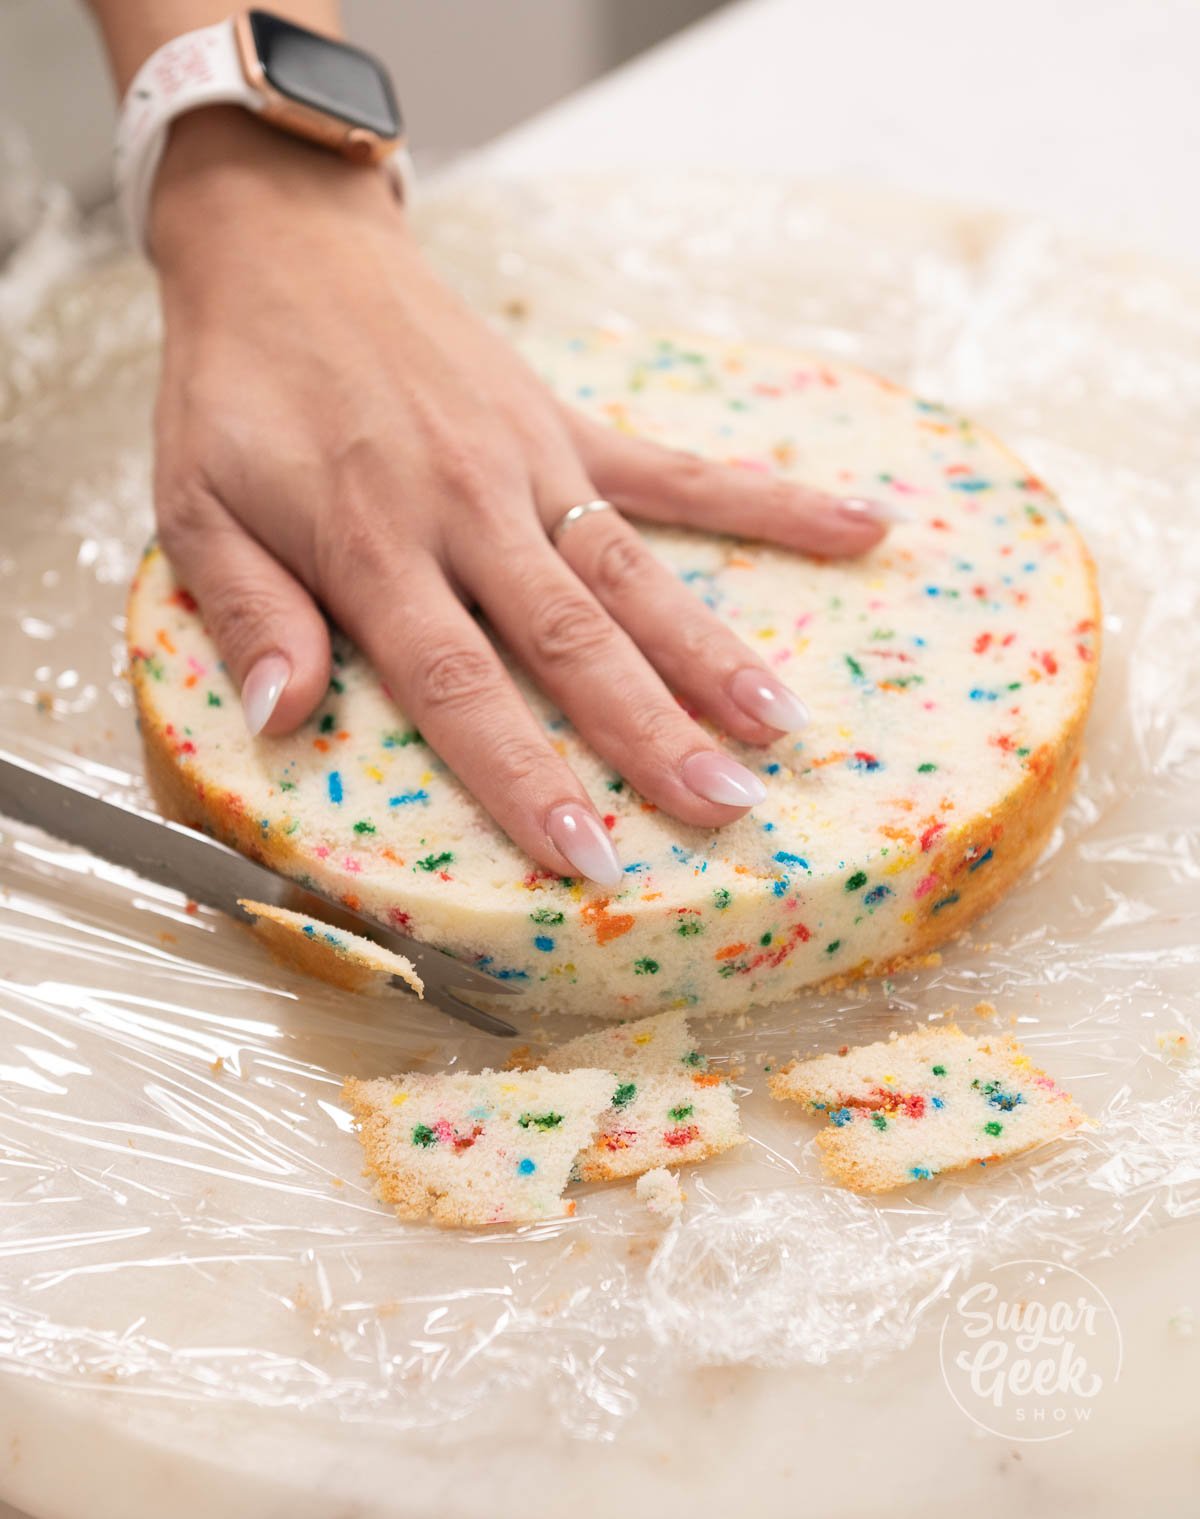 hand on top of cake layer holding knife while cutting cake